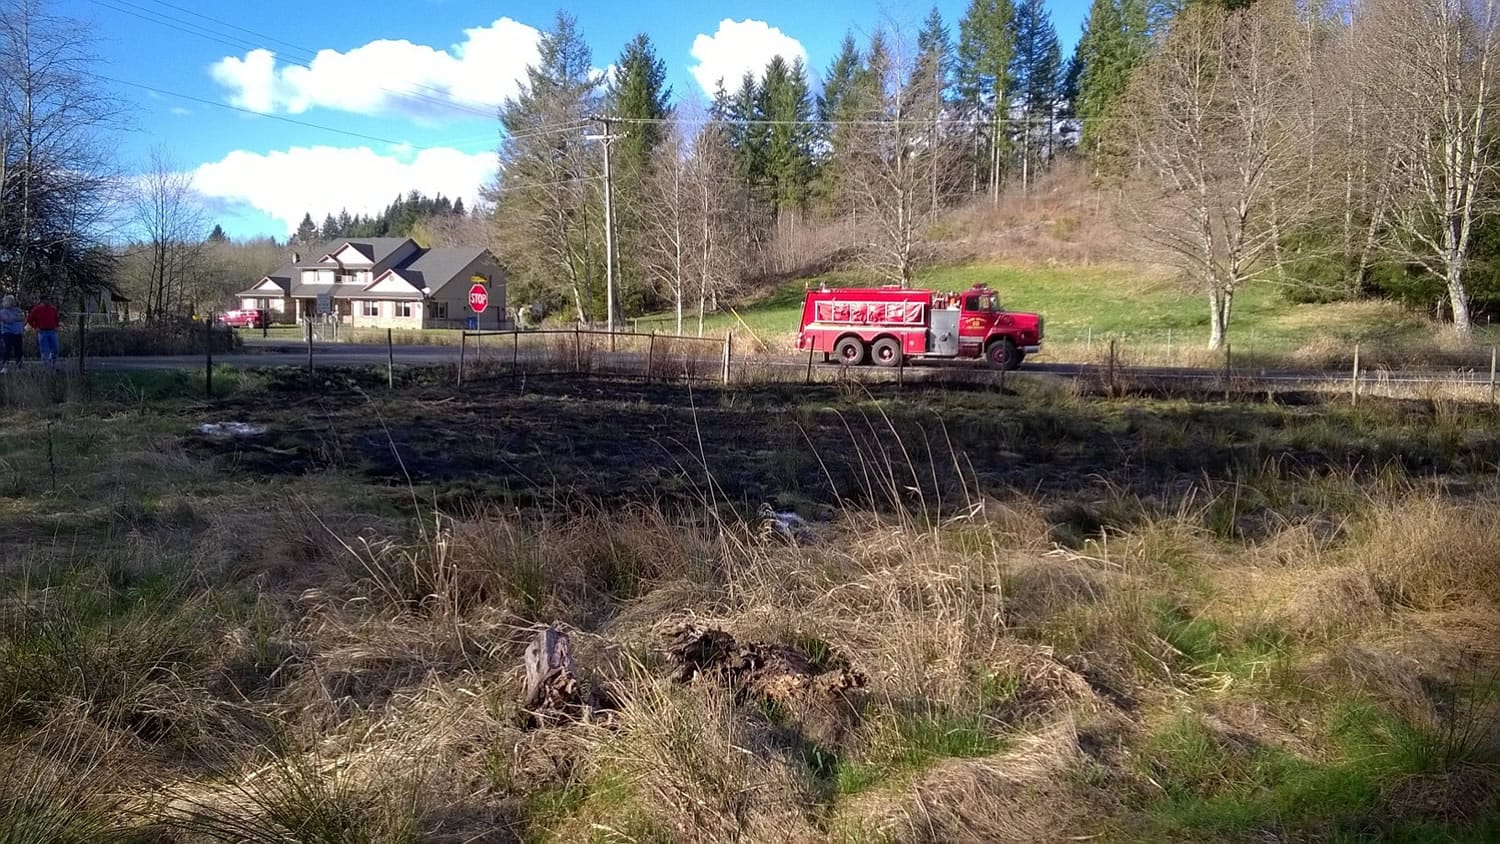 A Clark County Fire District 10 crew responded to a quarter-acre brush fire in Fargher Lake at 2:40 p.m.